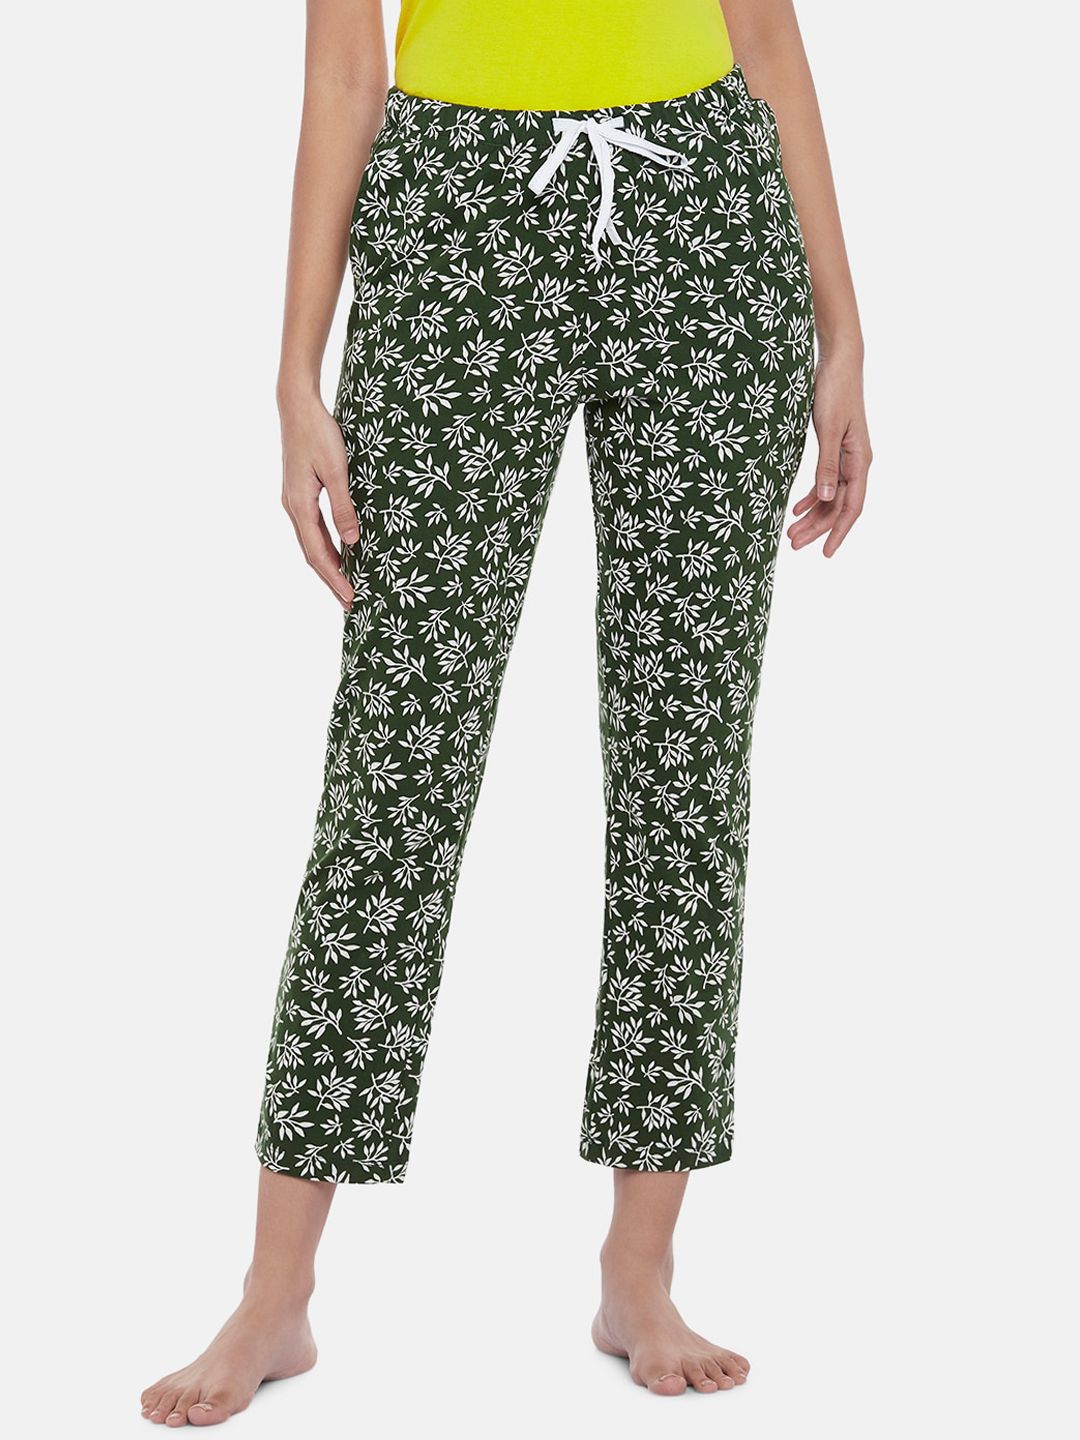 Dreamz by Pantaloons Women Olive Green Printed Cotton Lounge Pants Price in India